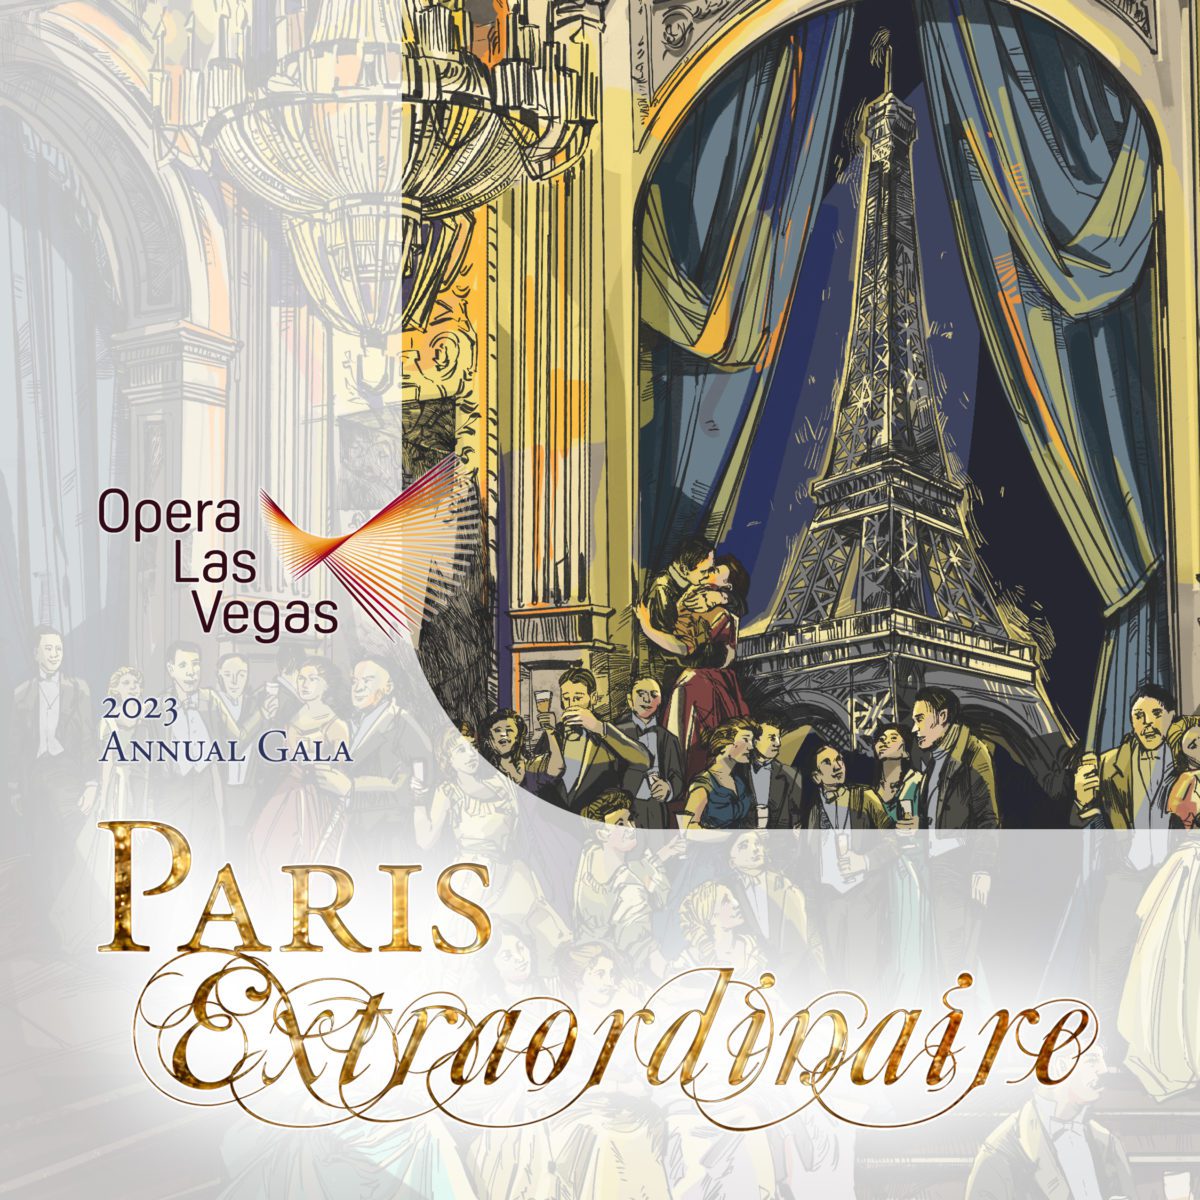 Opera Las Vegas' poster for their annual 2023 Gala, "Paris Extraordinaire." A crowd of 19th century Parisians gather for a formal ball in a luxurious ballroom with the Eiffel Tower lit in the background. Illustration by Gregory Storkan and Maria Savko.